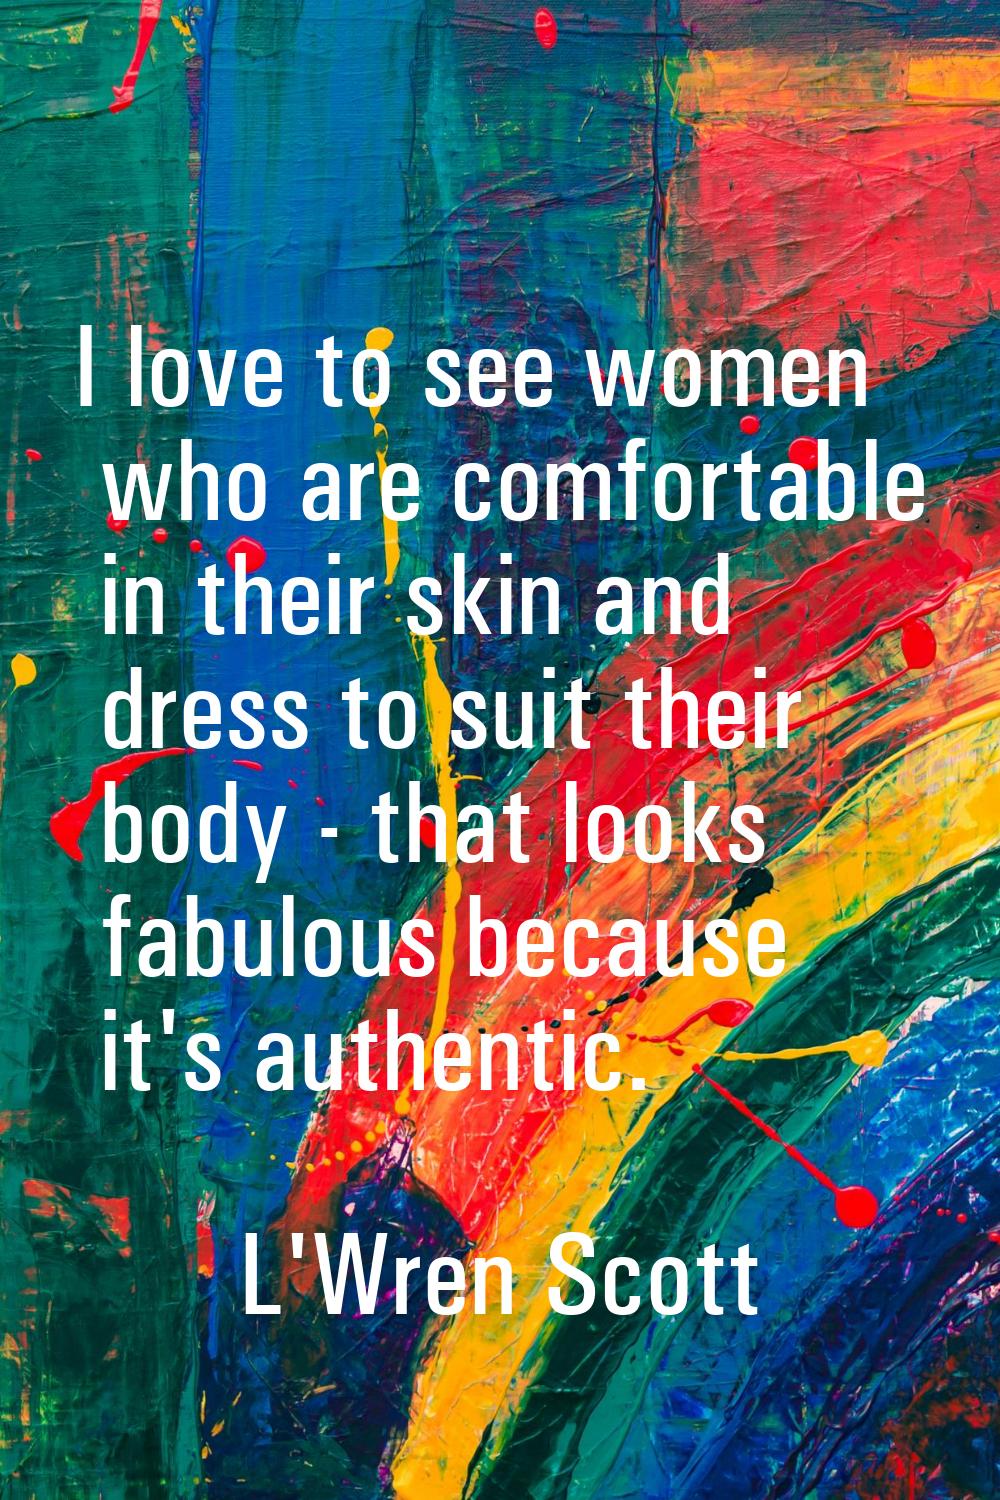 I love to see women who are comfortable in their skin and dress to suit their body - that looks fab